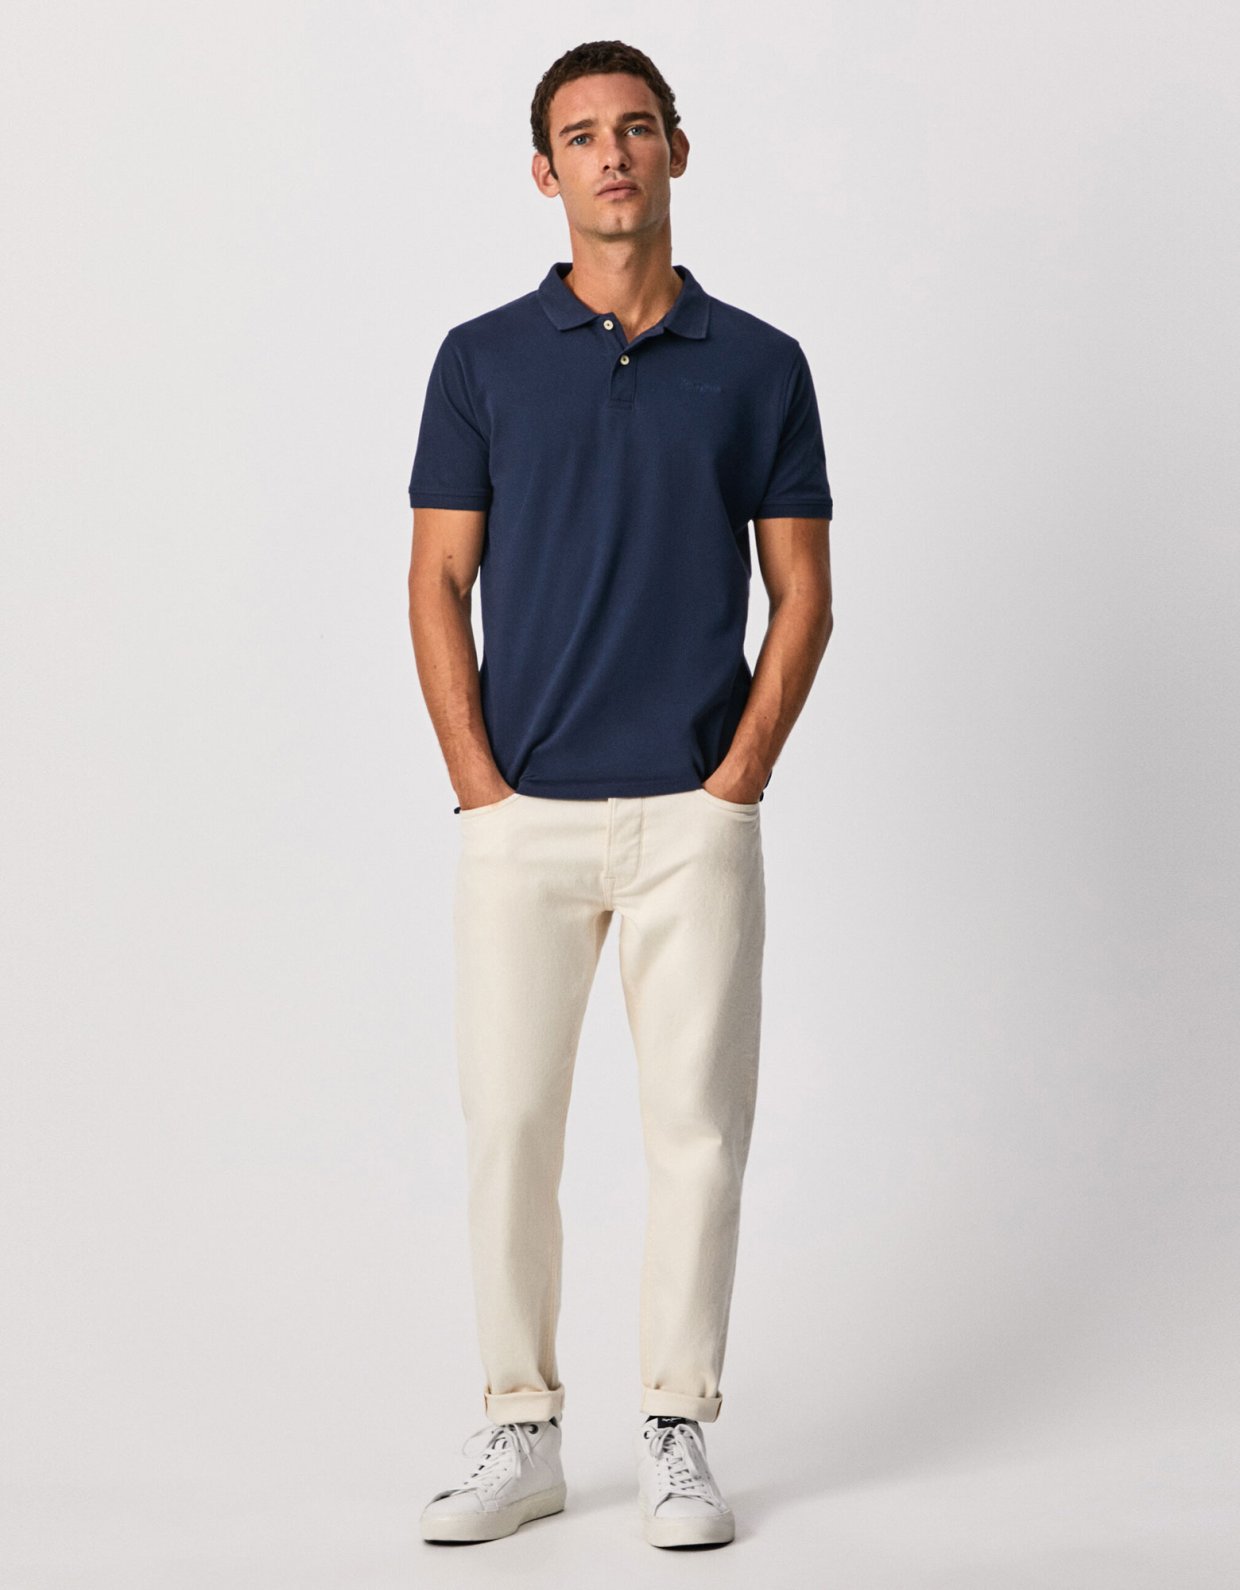 Pepe Jeans Vincent n basic polo t-shirt navy